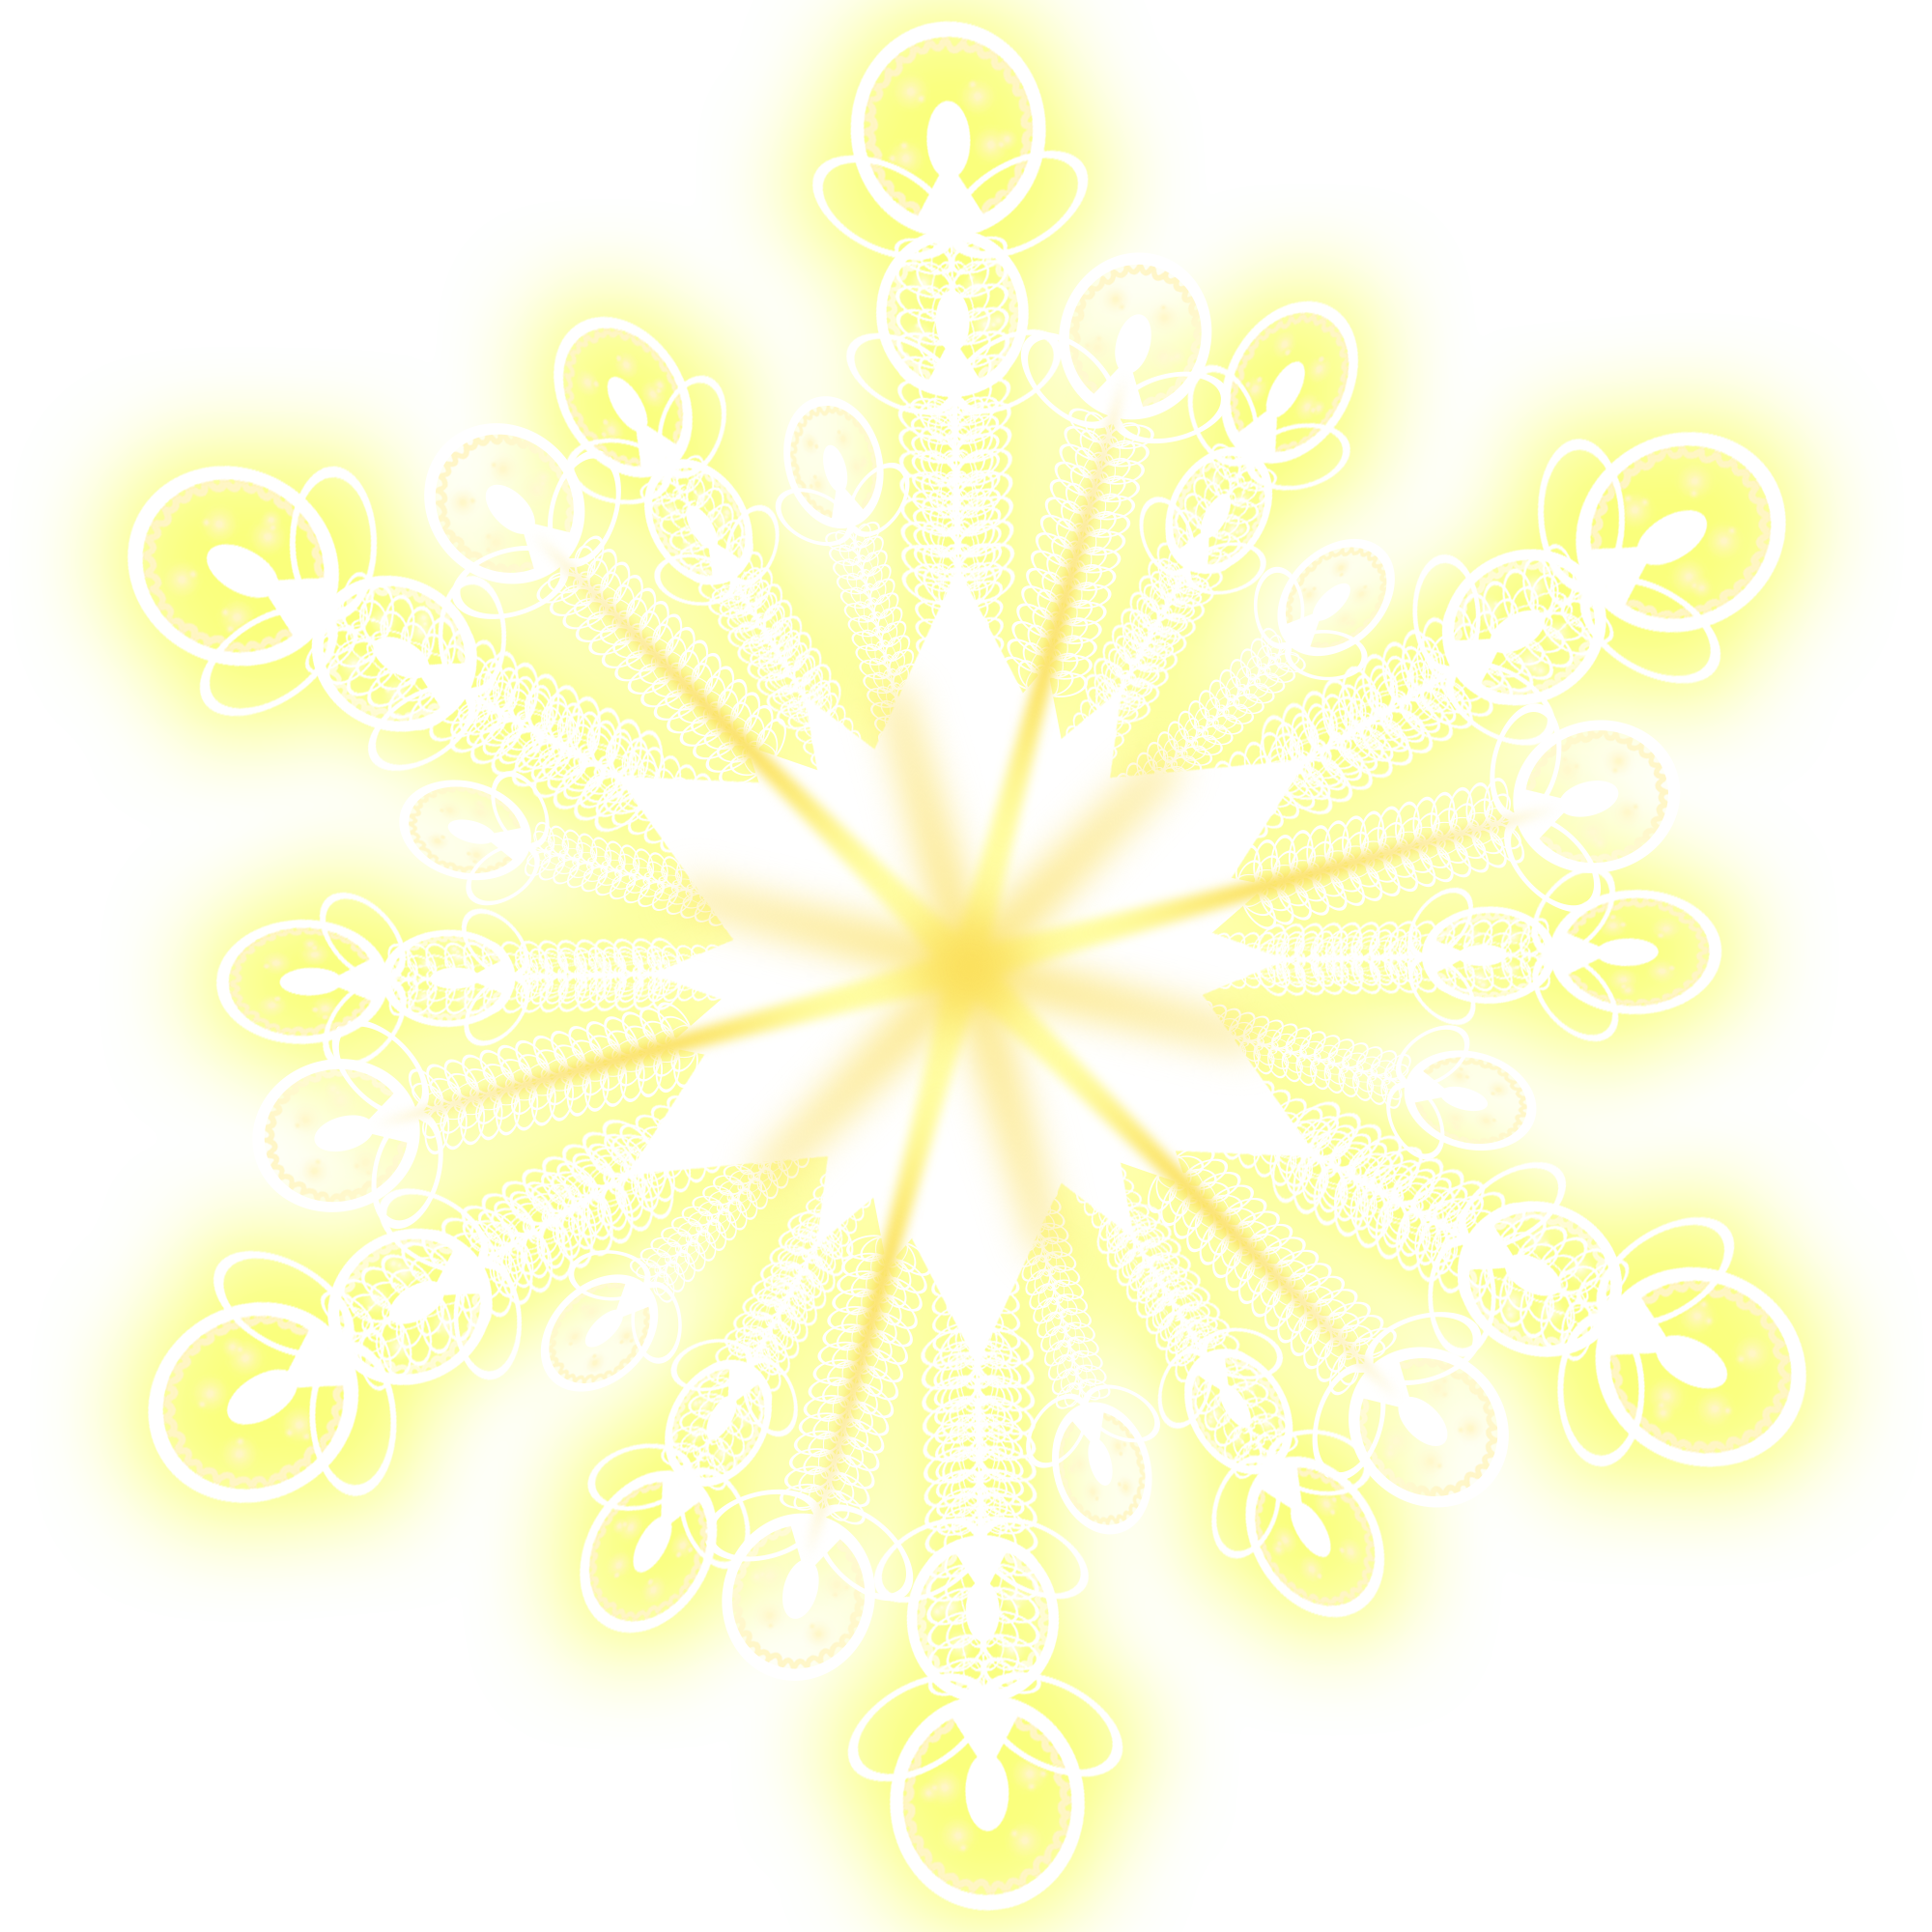 Hand Painted Material PNG Picture, Simple Hand Painted White Snowflakes  Transparent Material, Snowflake Clipart, Png Element, White Snowflake PNG  Image For Free…